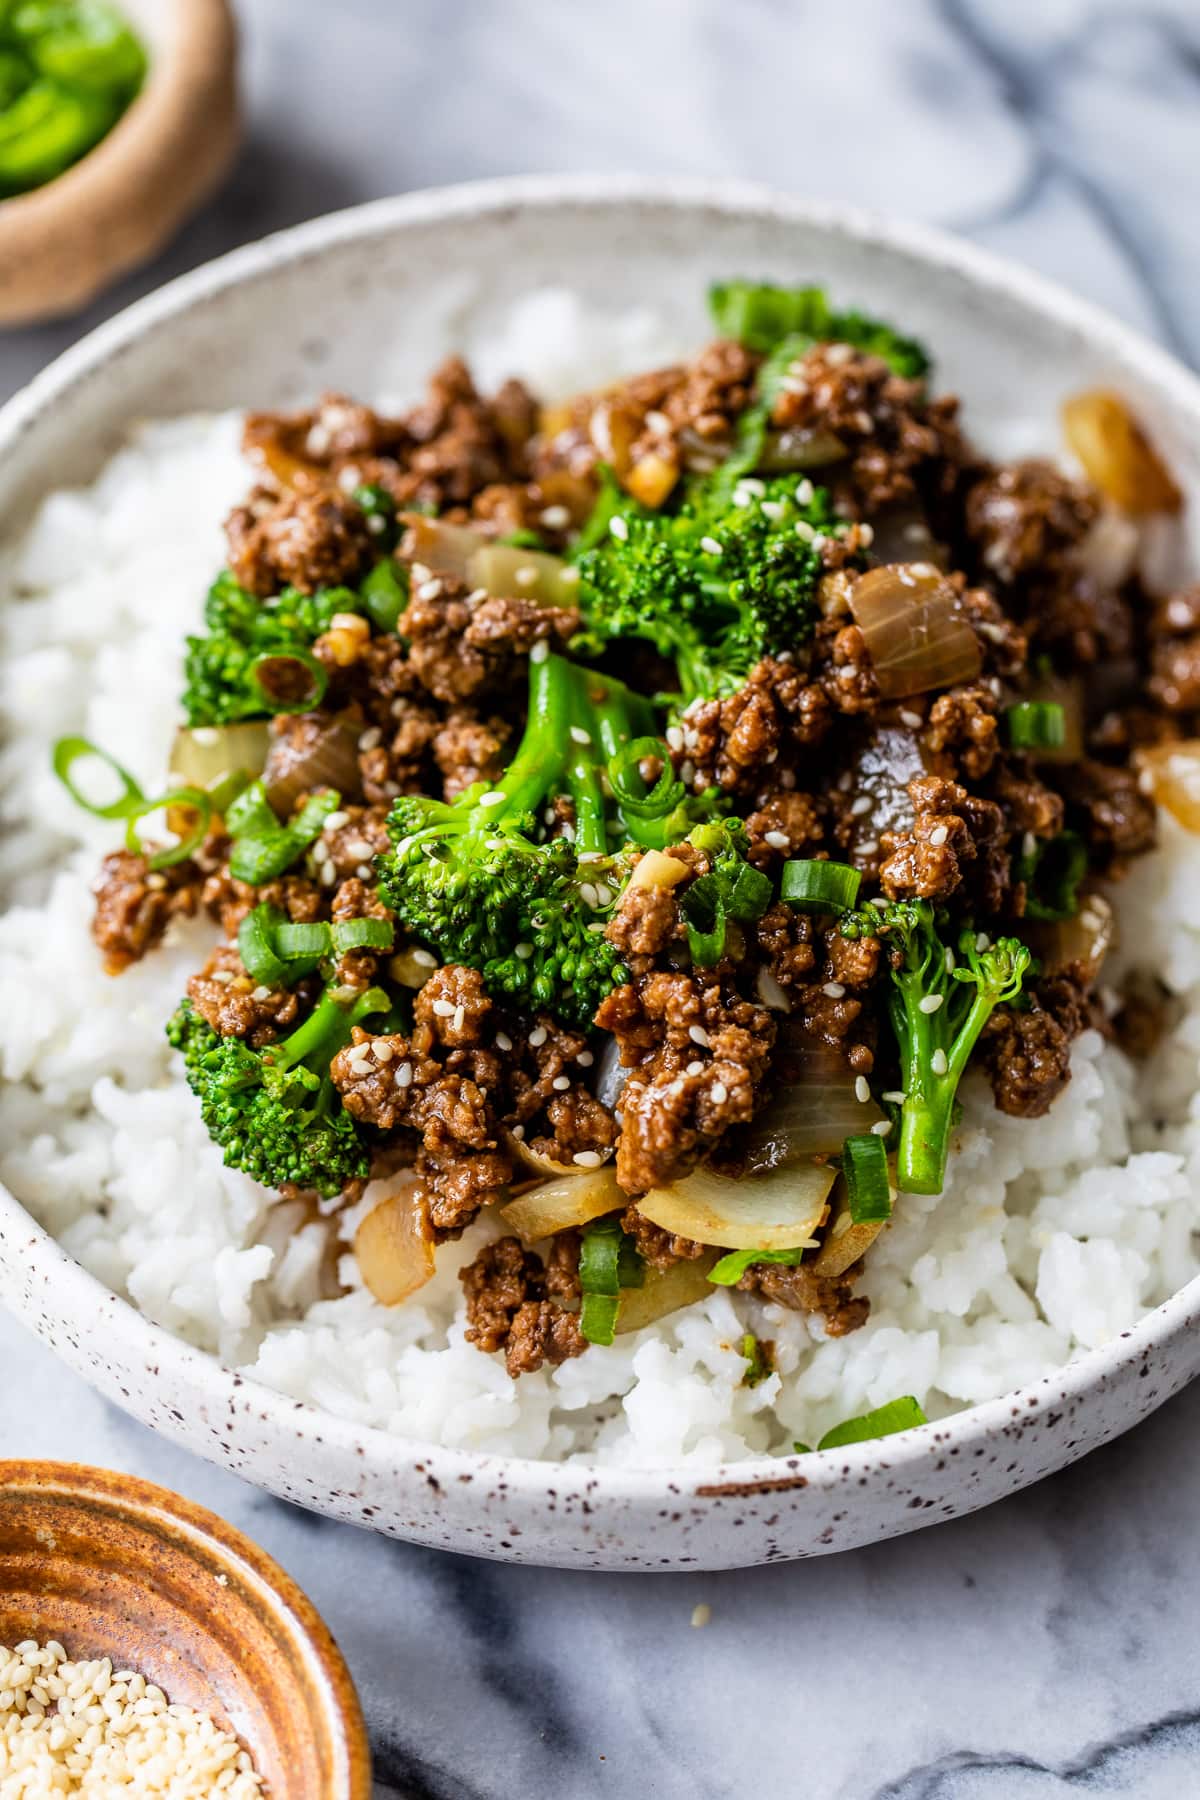 GRASS-FED BEEF AND BROCCOLI STIR FRY